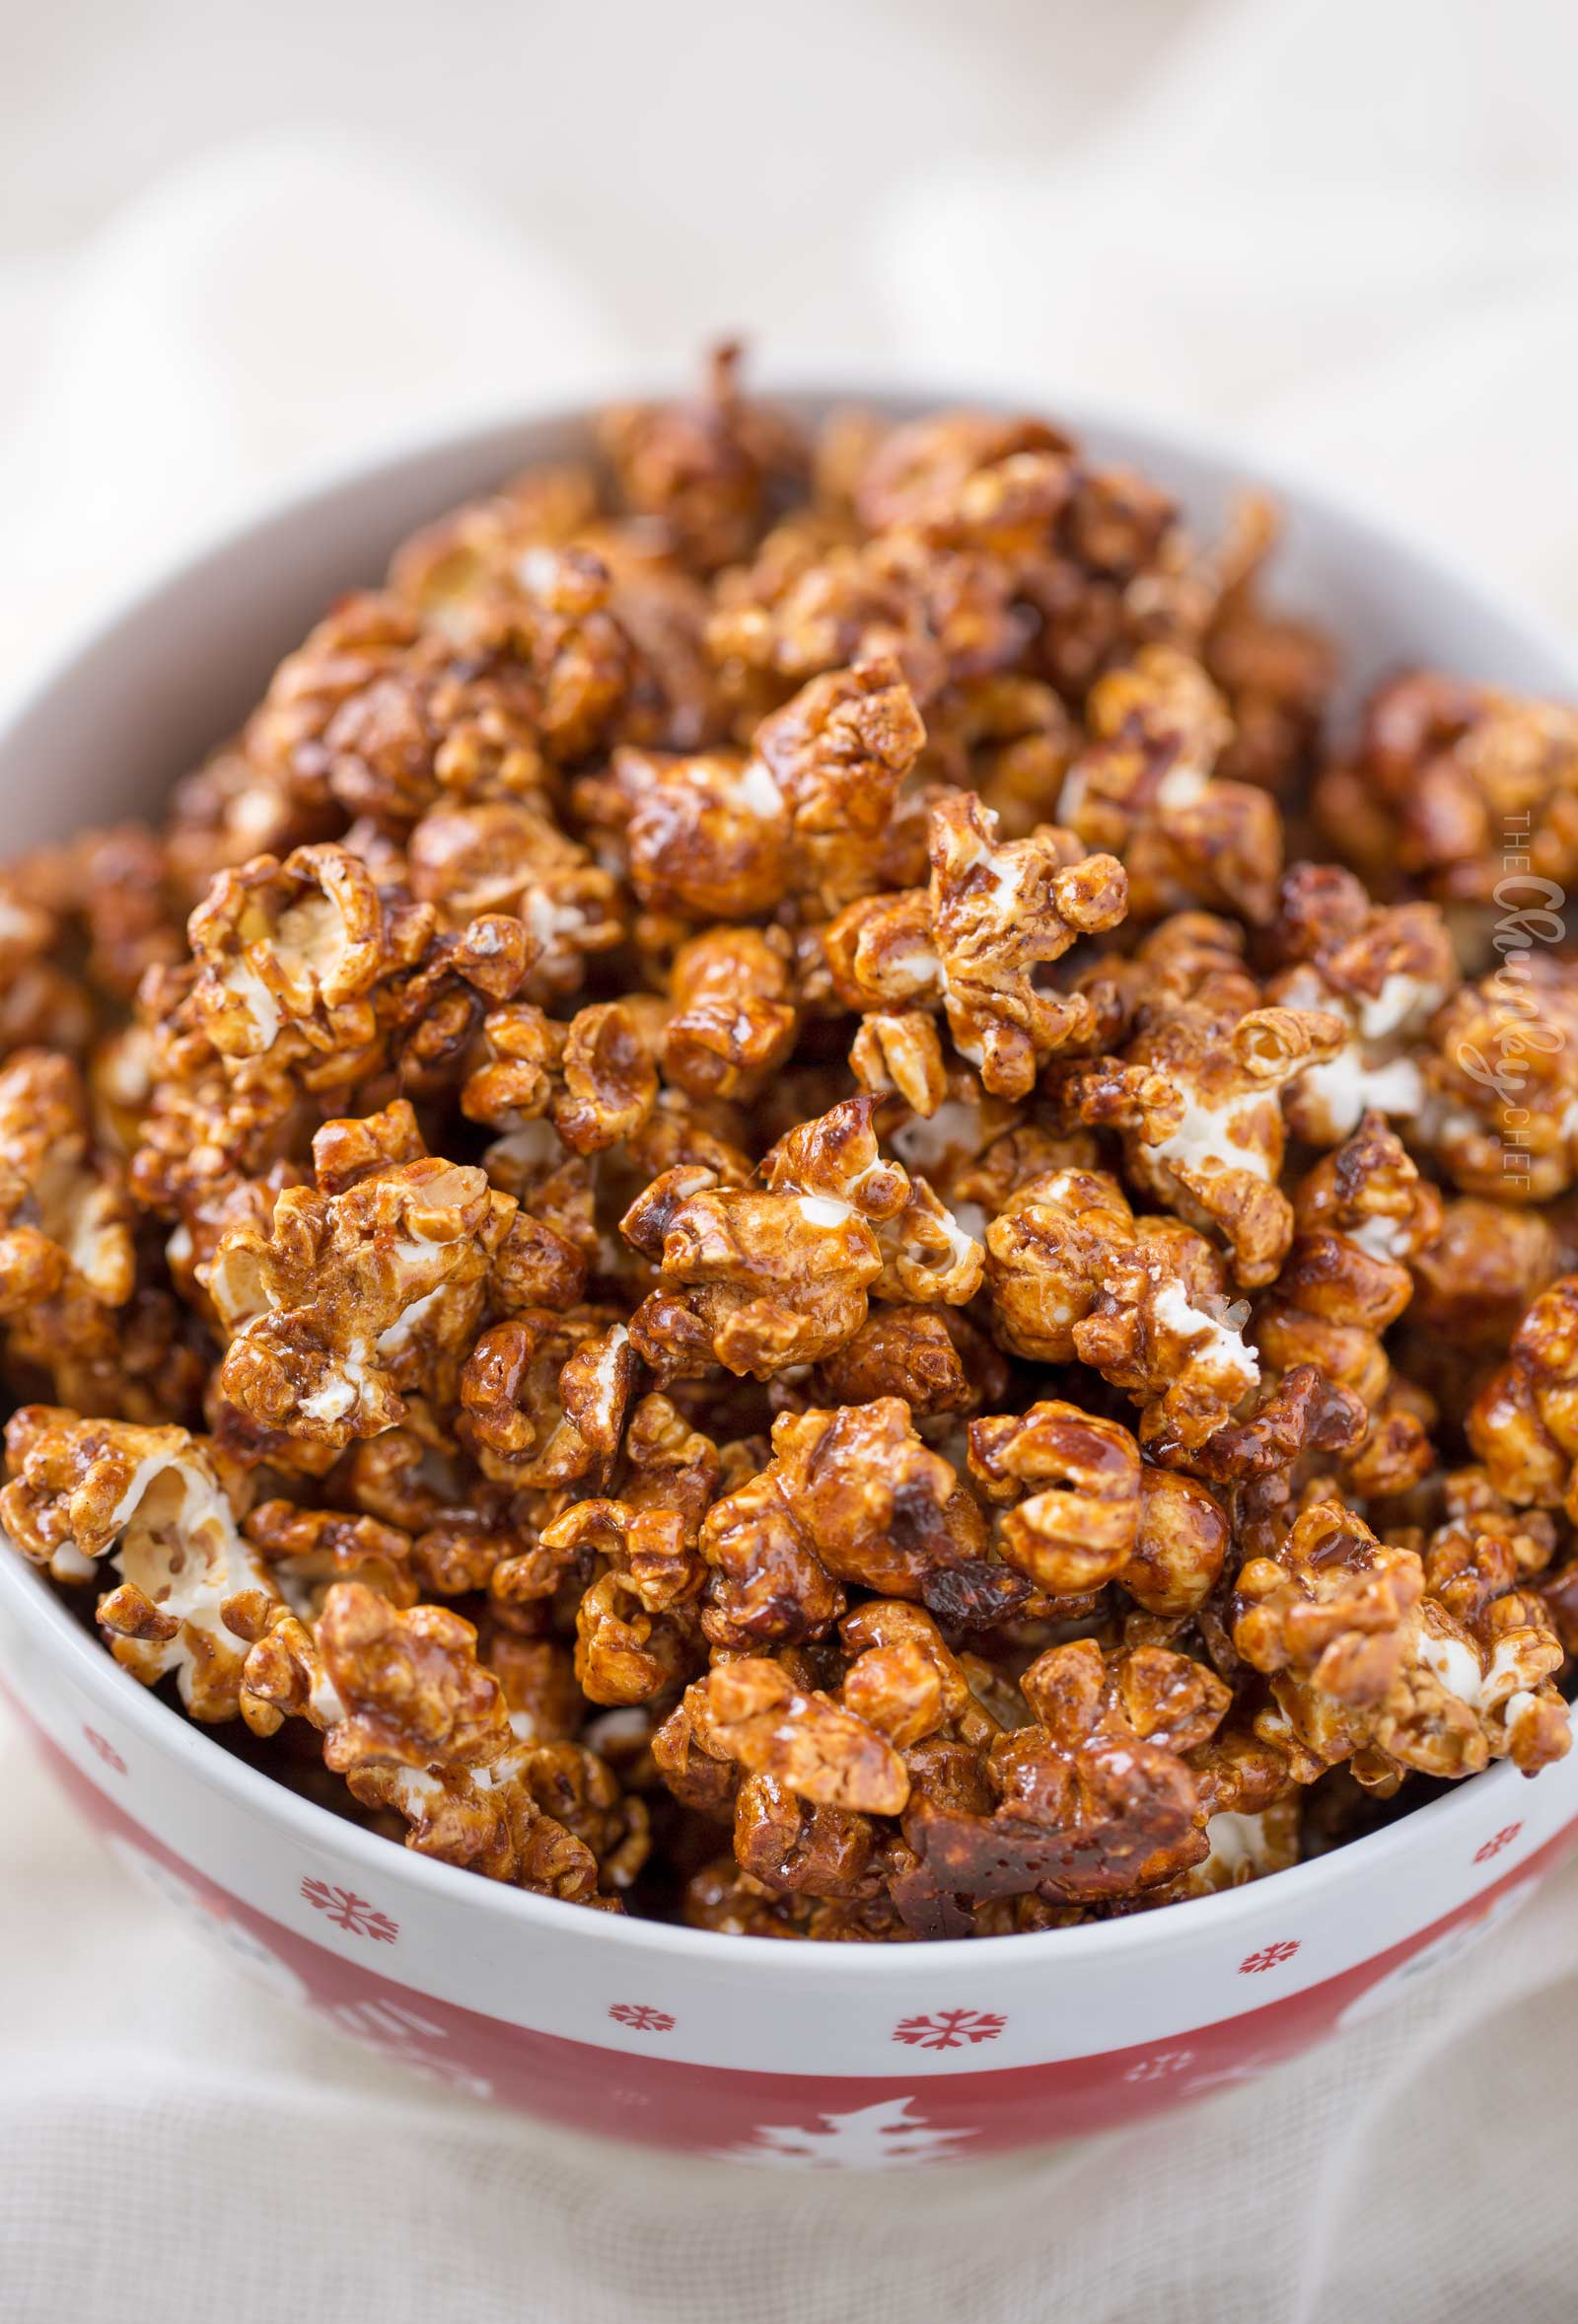 Easy-Homemade-Gingerbread-Caramel-Popcorn-4 - The Chunky Chef